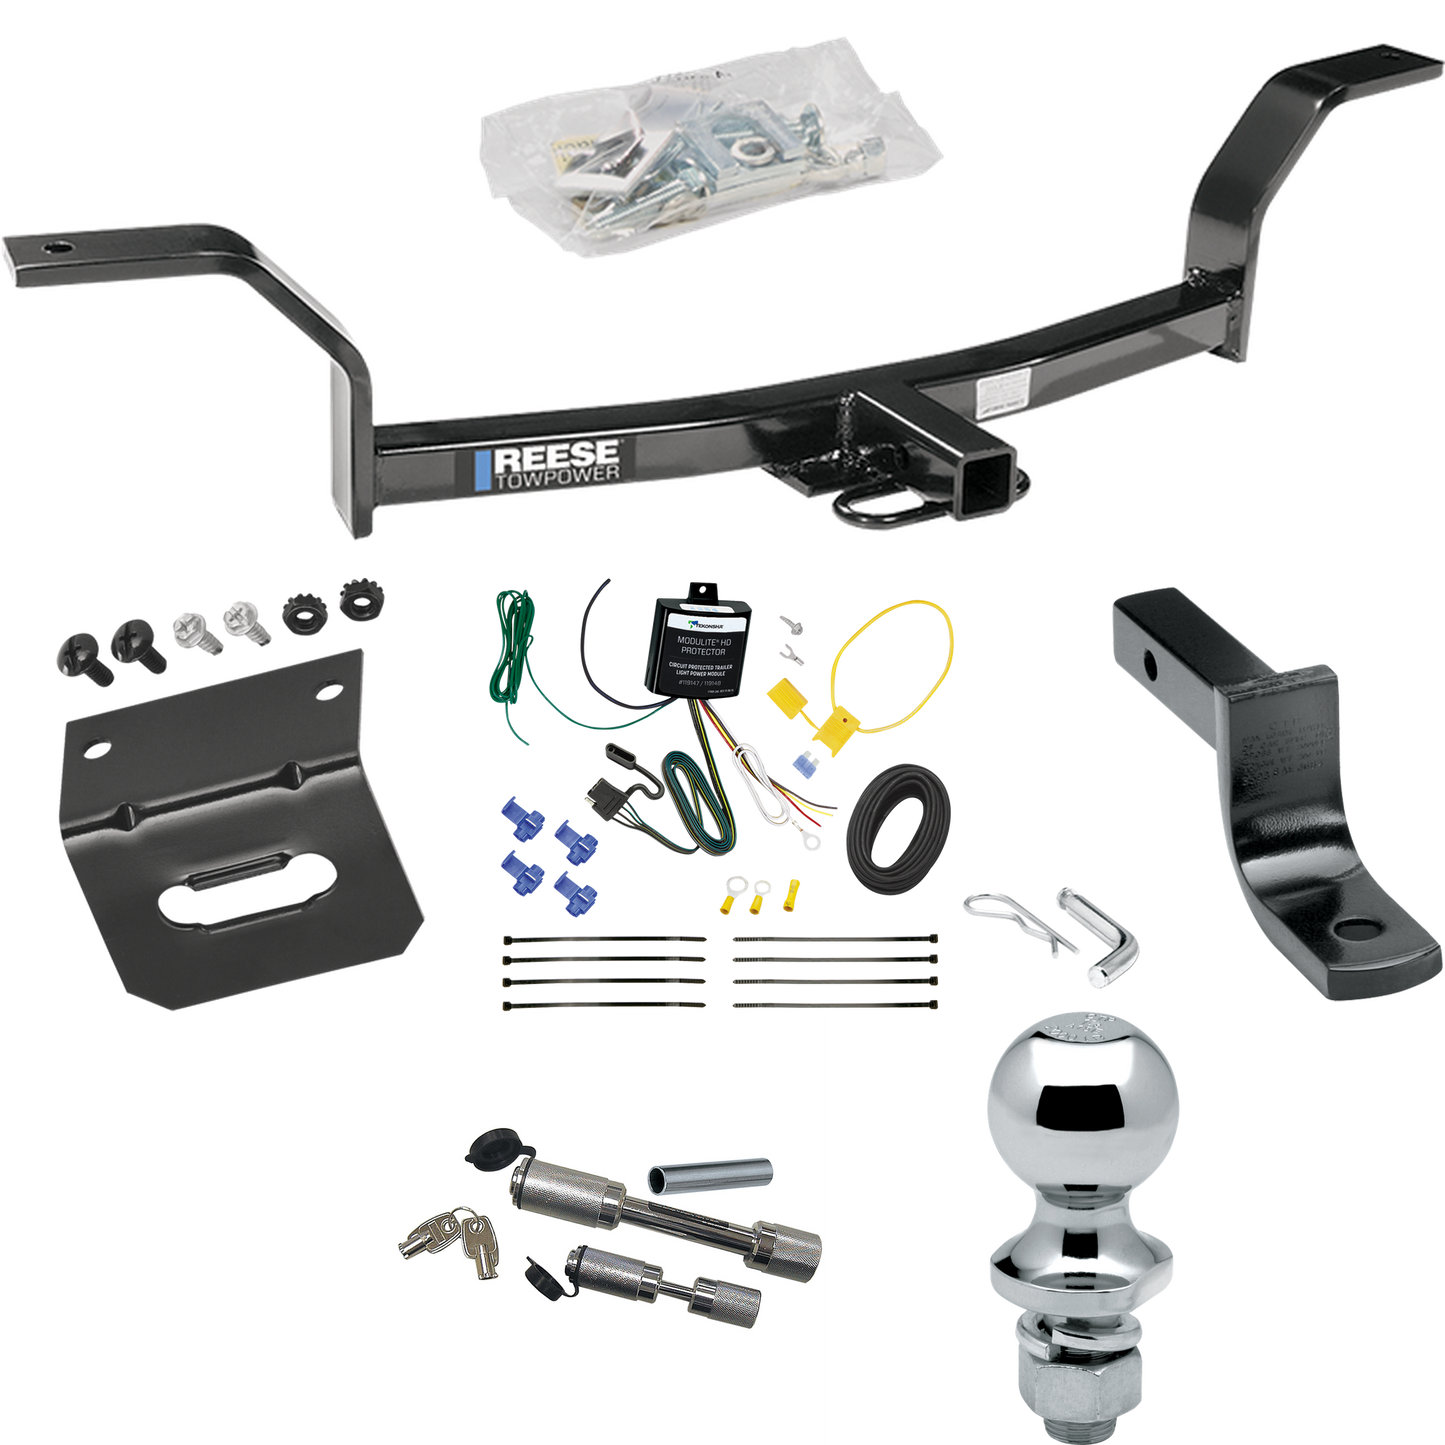 Fits 1992-2000 Honda Civic Trailer Hitch Tow PKG w/ 4-Flat Wiring Harness + Draw-Bar + 1-7/8" Ball + Wiring Bracket + Dual Hitch & Coupler Locks By Reese Towpower